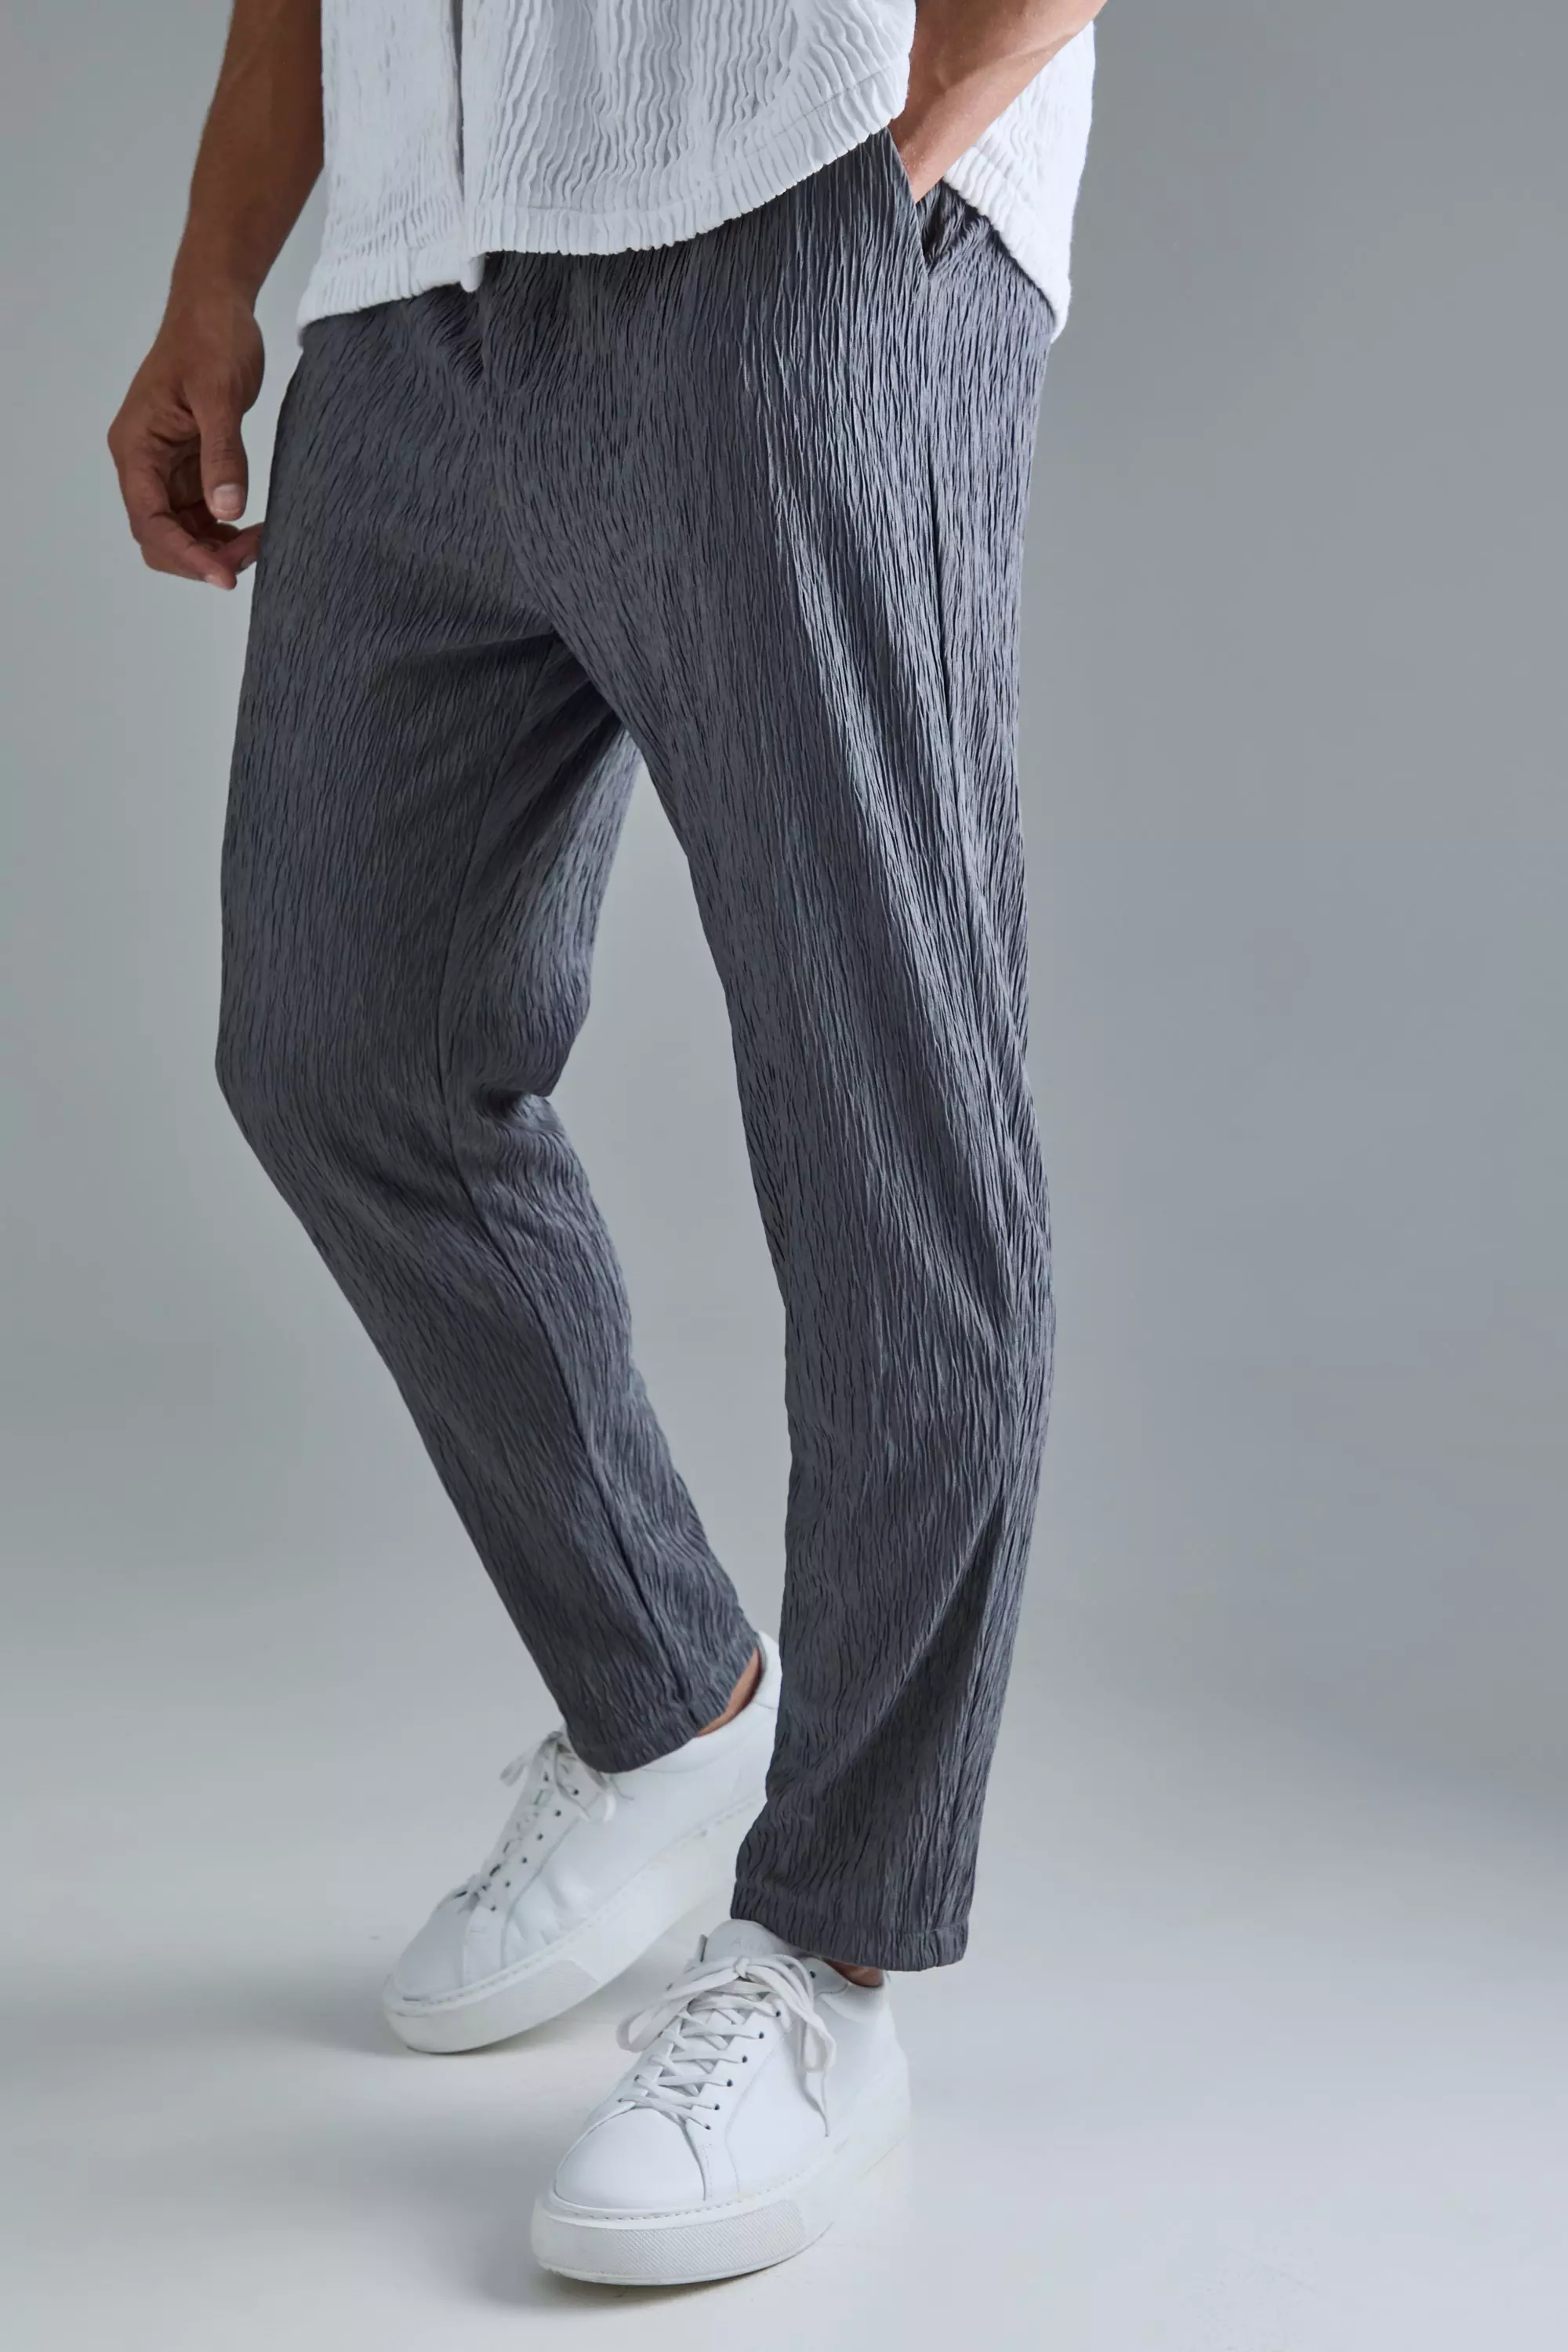 Textured Satin Smart Tapered Trousers grey blue